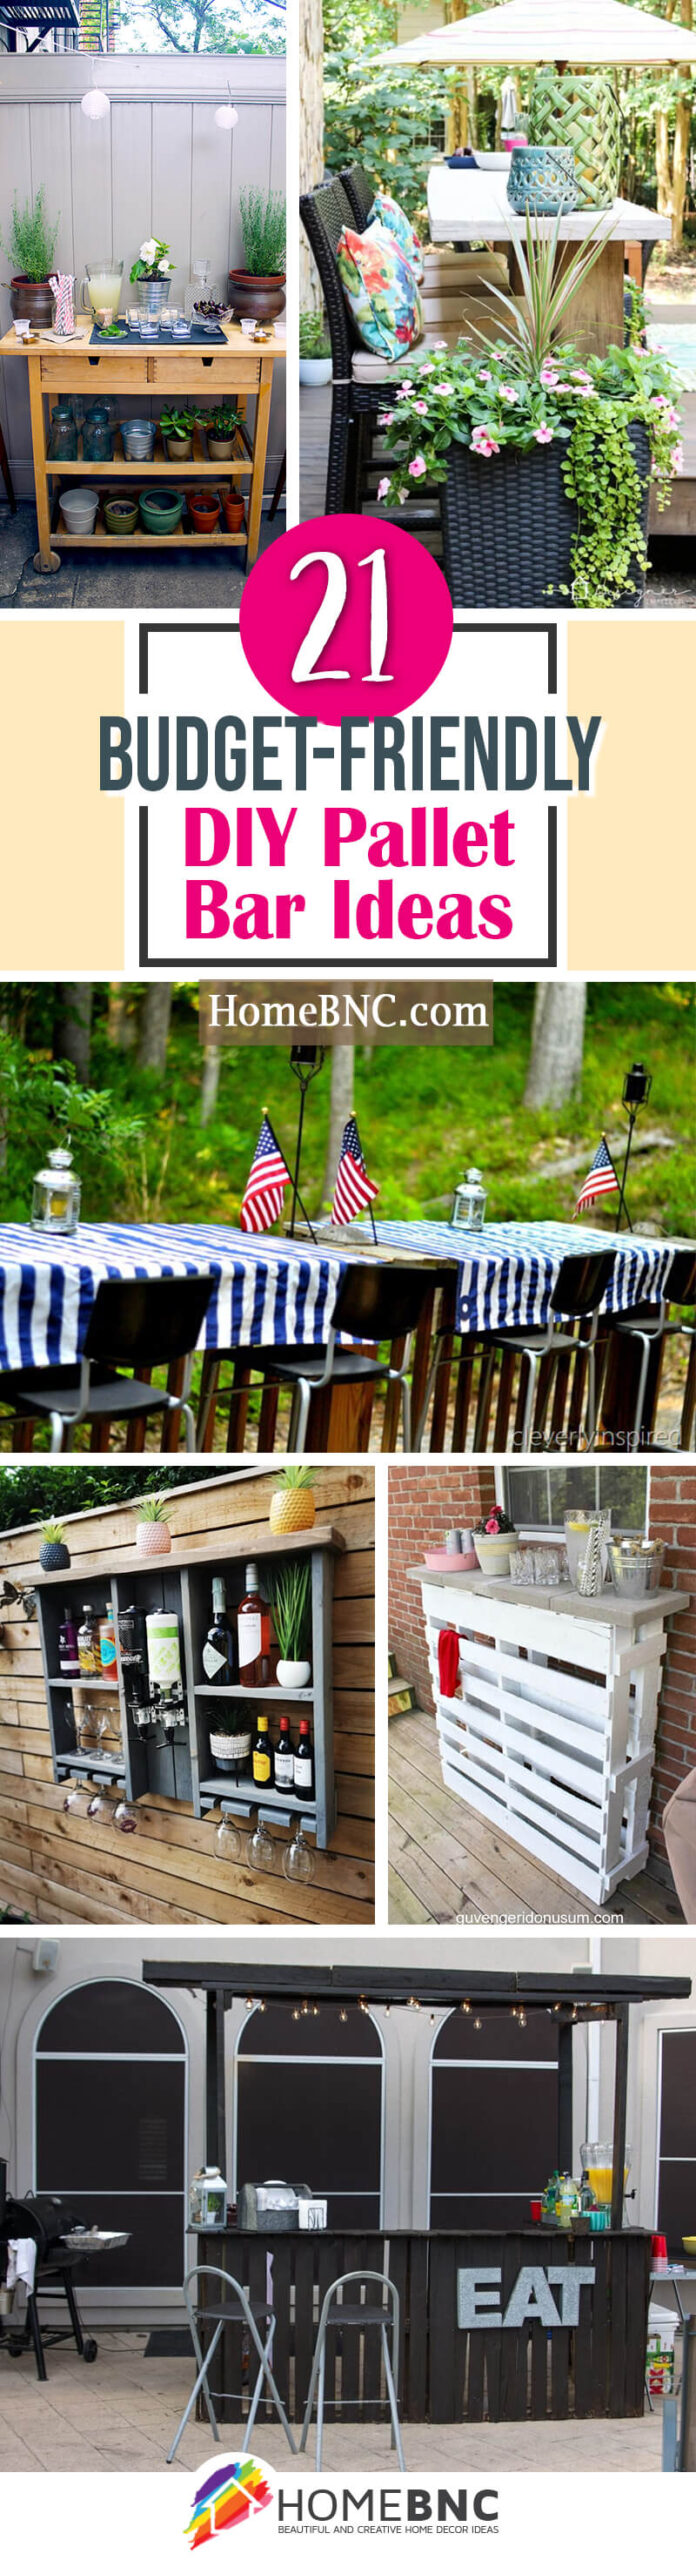 18 DIY Pallet Bar Ideas You Can Make at Home in 18